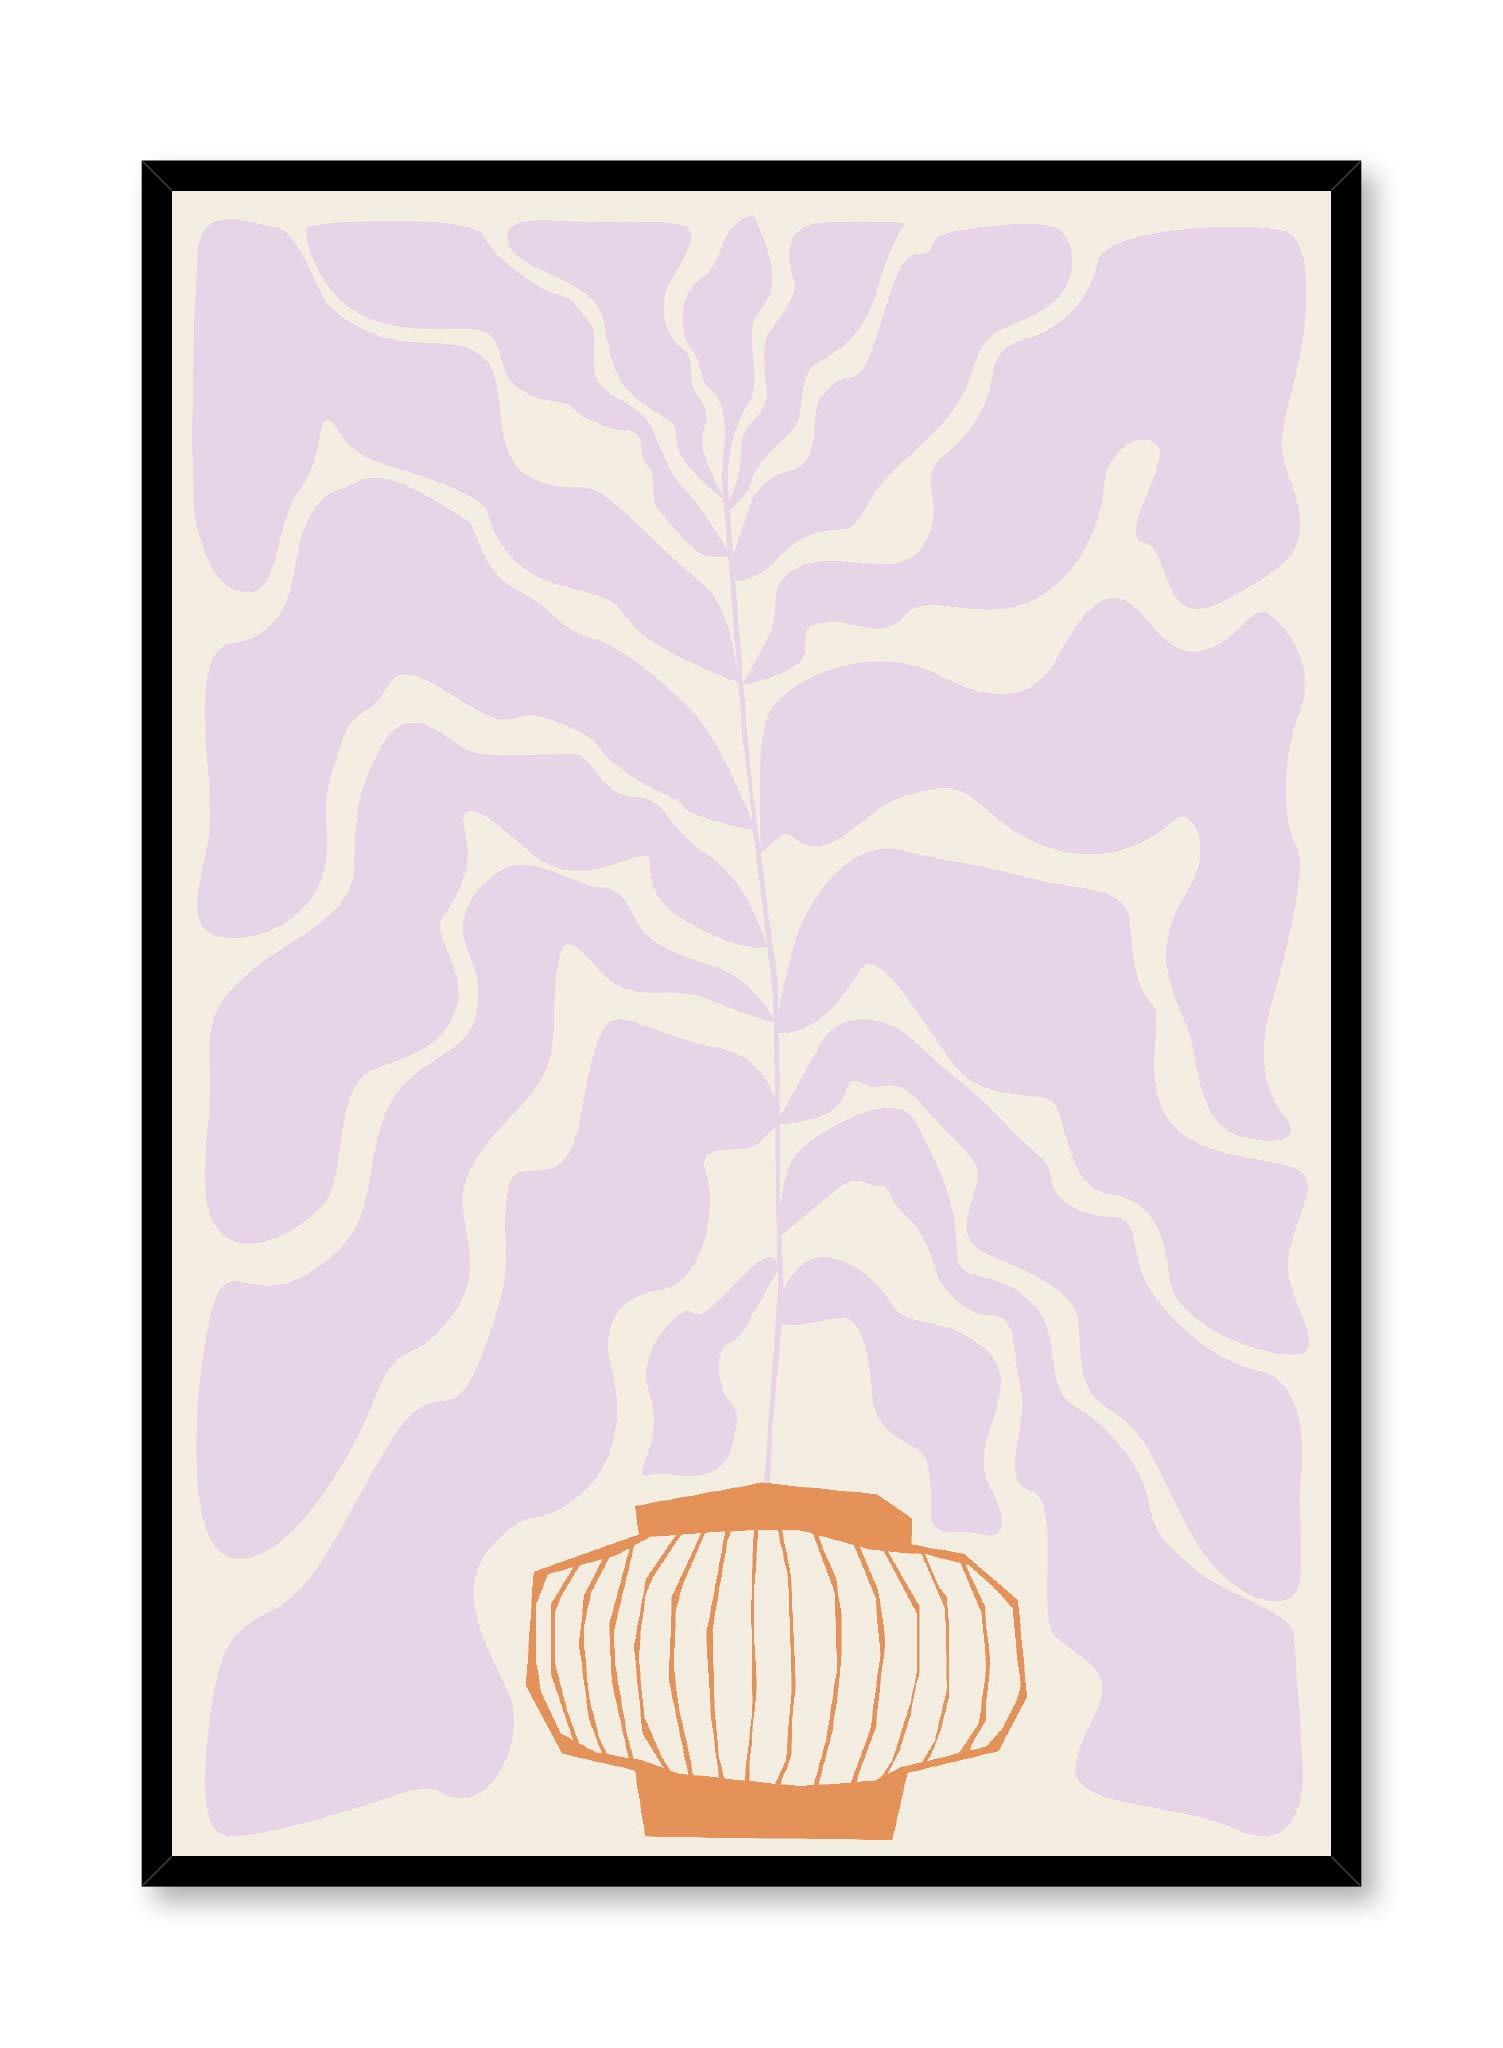 Lilac Bust is a vector illustration of an explosion of lilac flowers from a lantern-shaped flower pot by Opposite Wall.